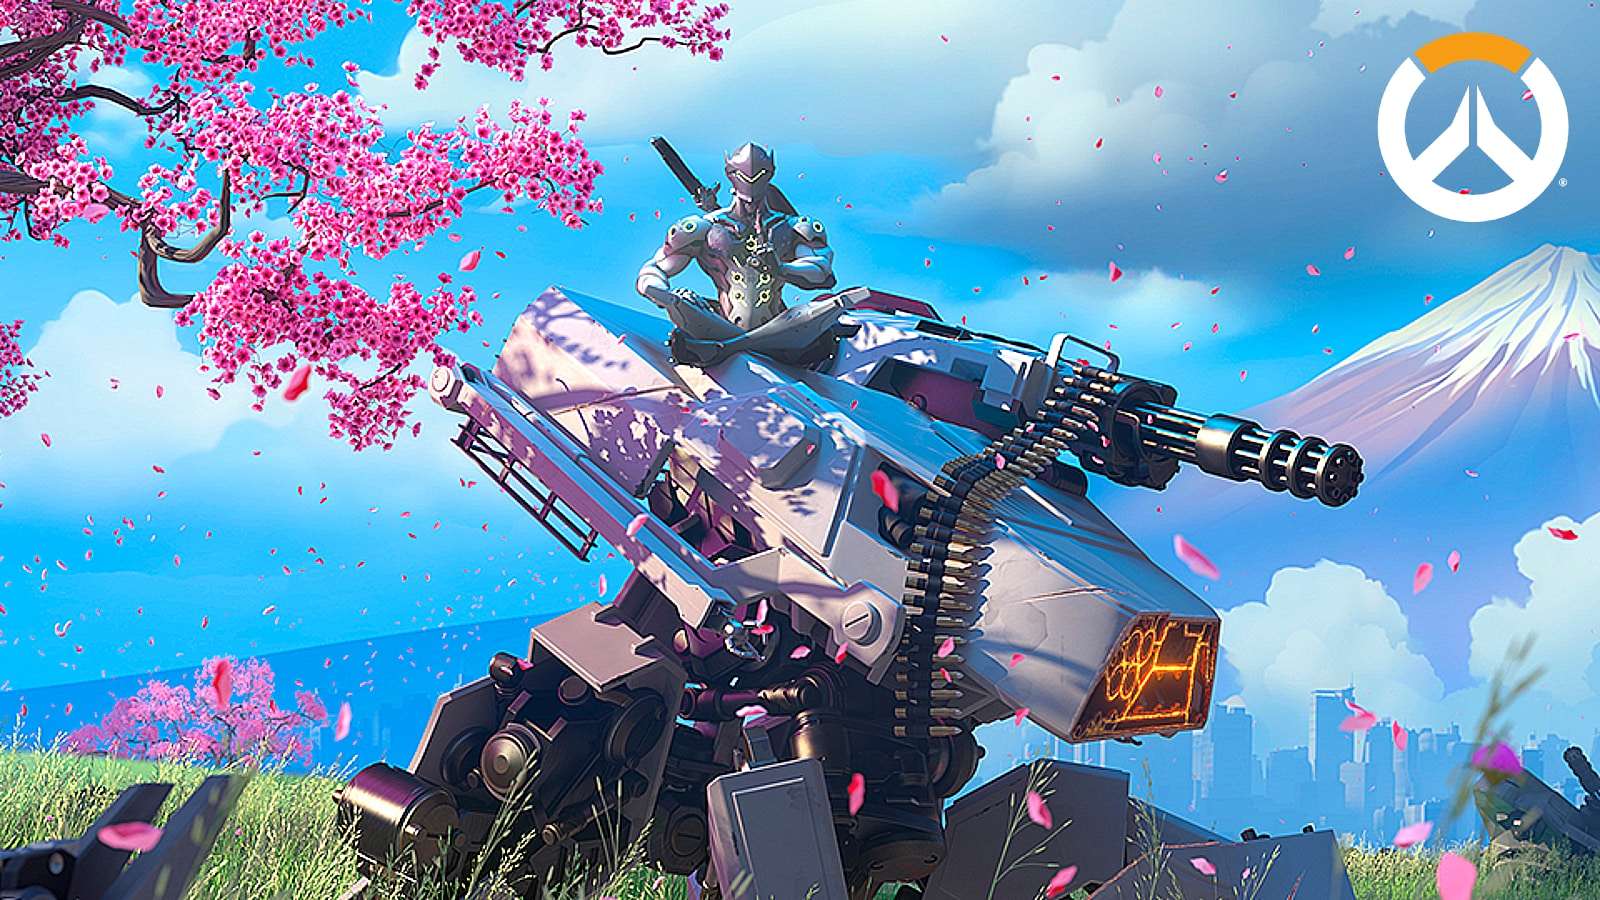 Overwatch ninja sits on top of a huge robotic gun with mount fuji and cherry blossoms in the background